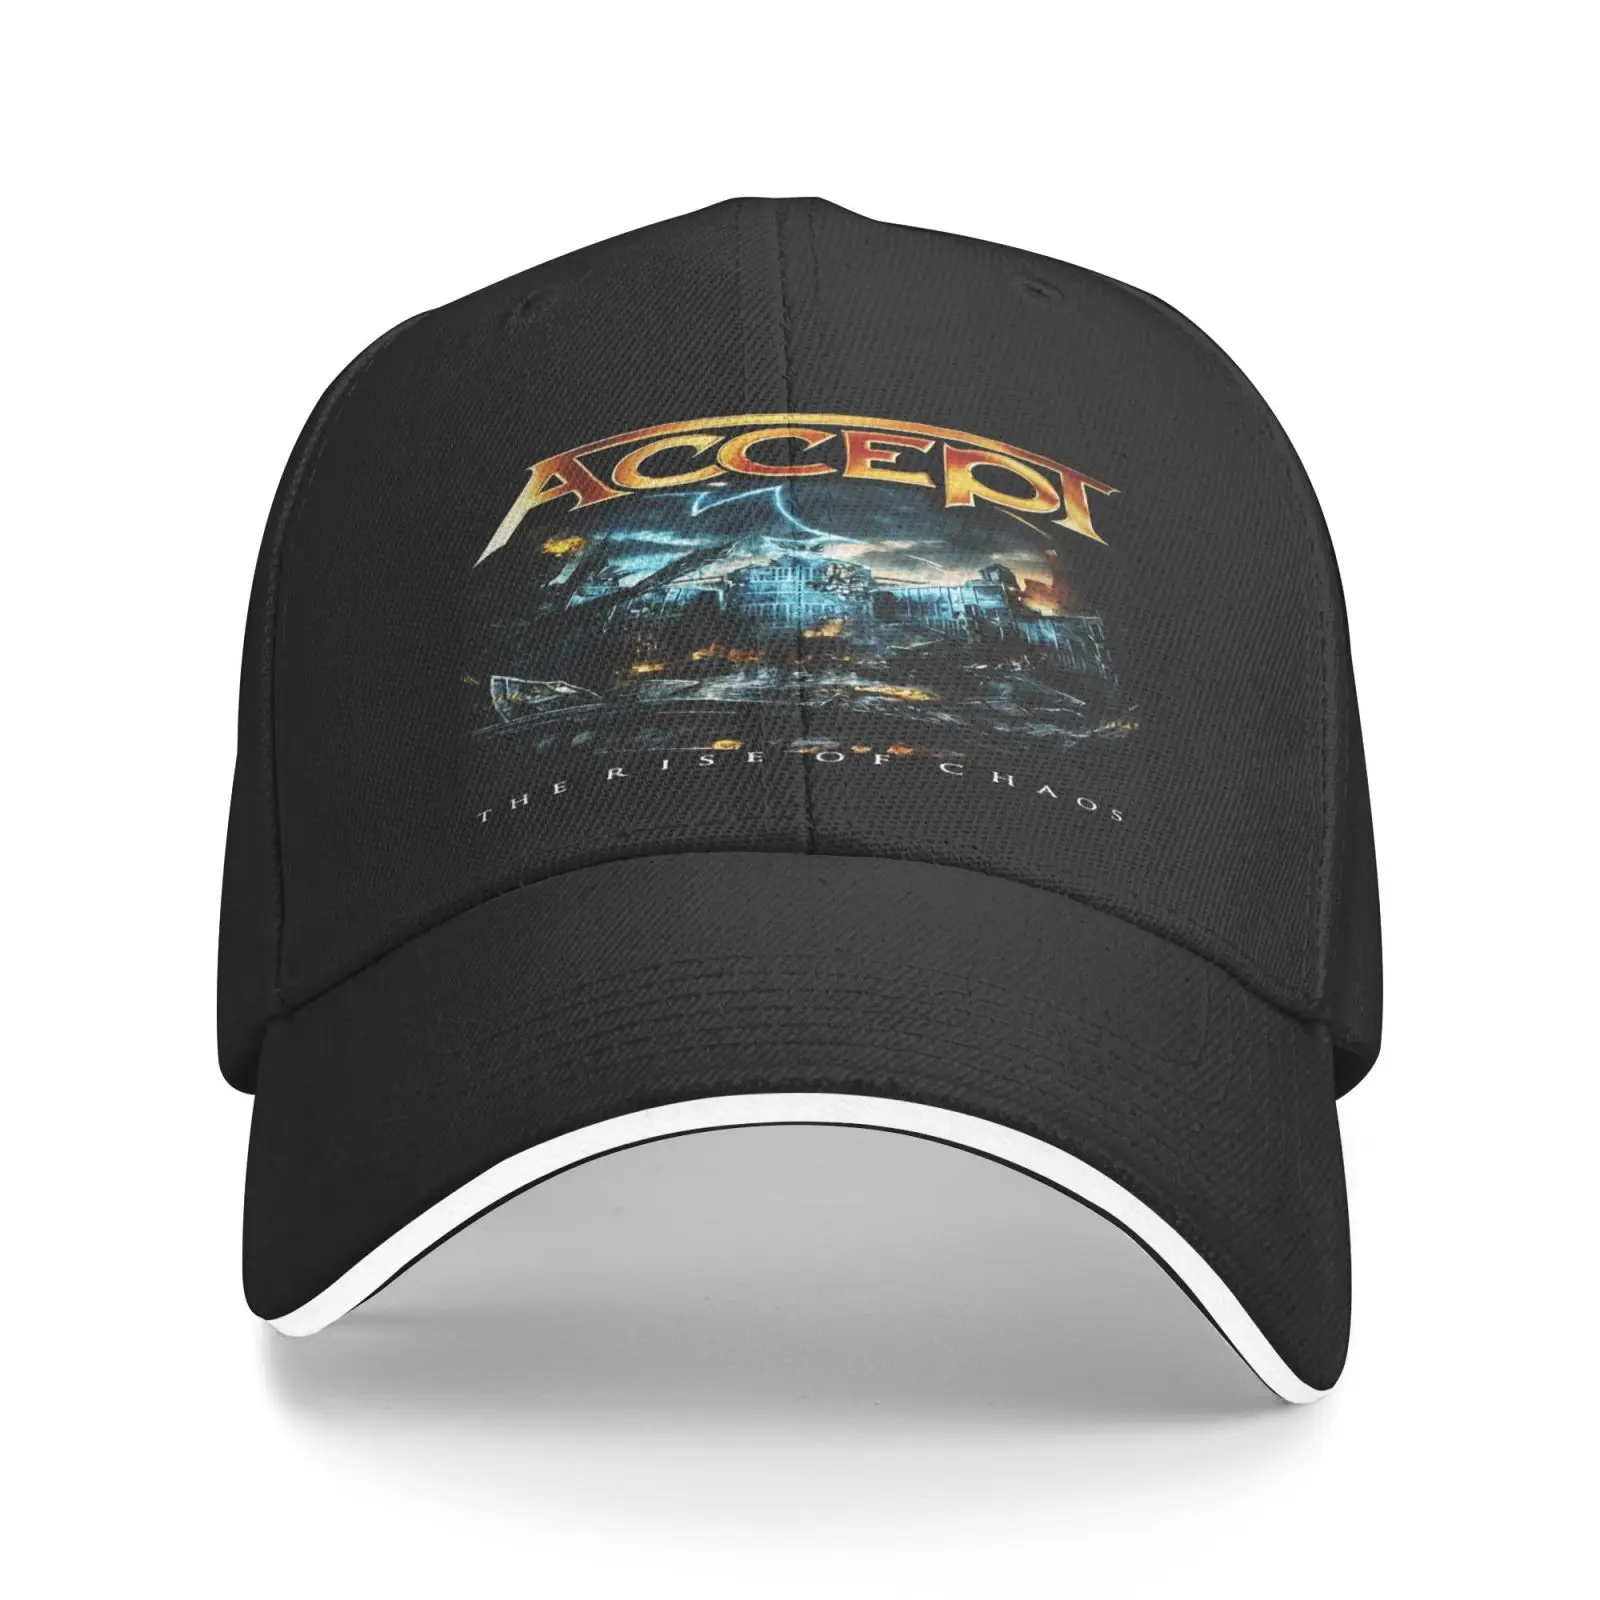 

Accept The Rise Of Chaos Heavy Hats For Men Cowgirl Hat Male Cap Male Cap For Men Cap For Boy Cap Women's Cap 2021 Fashionable